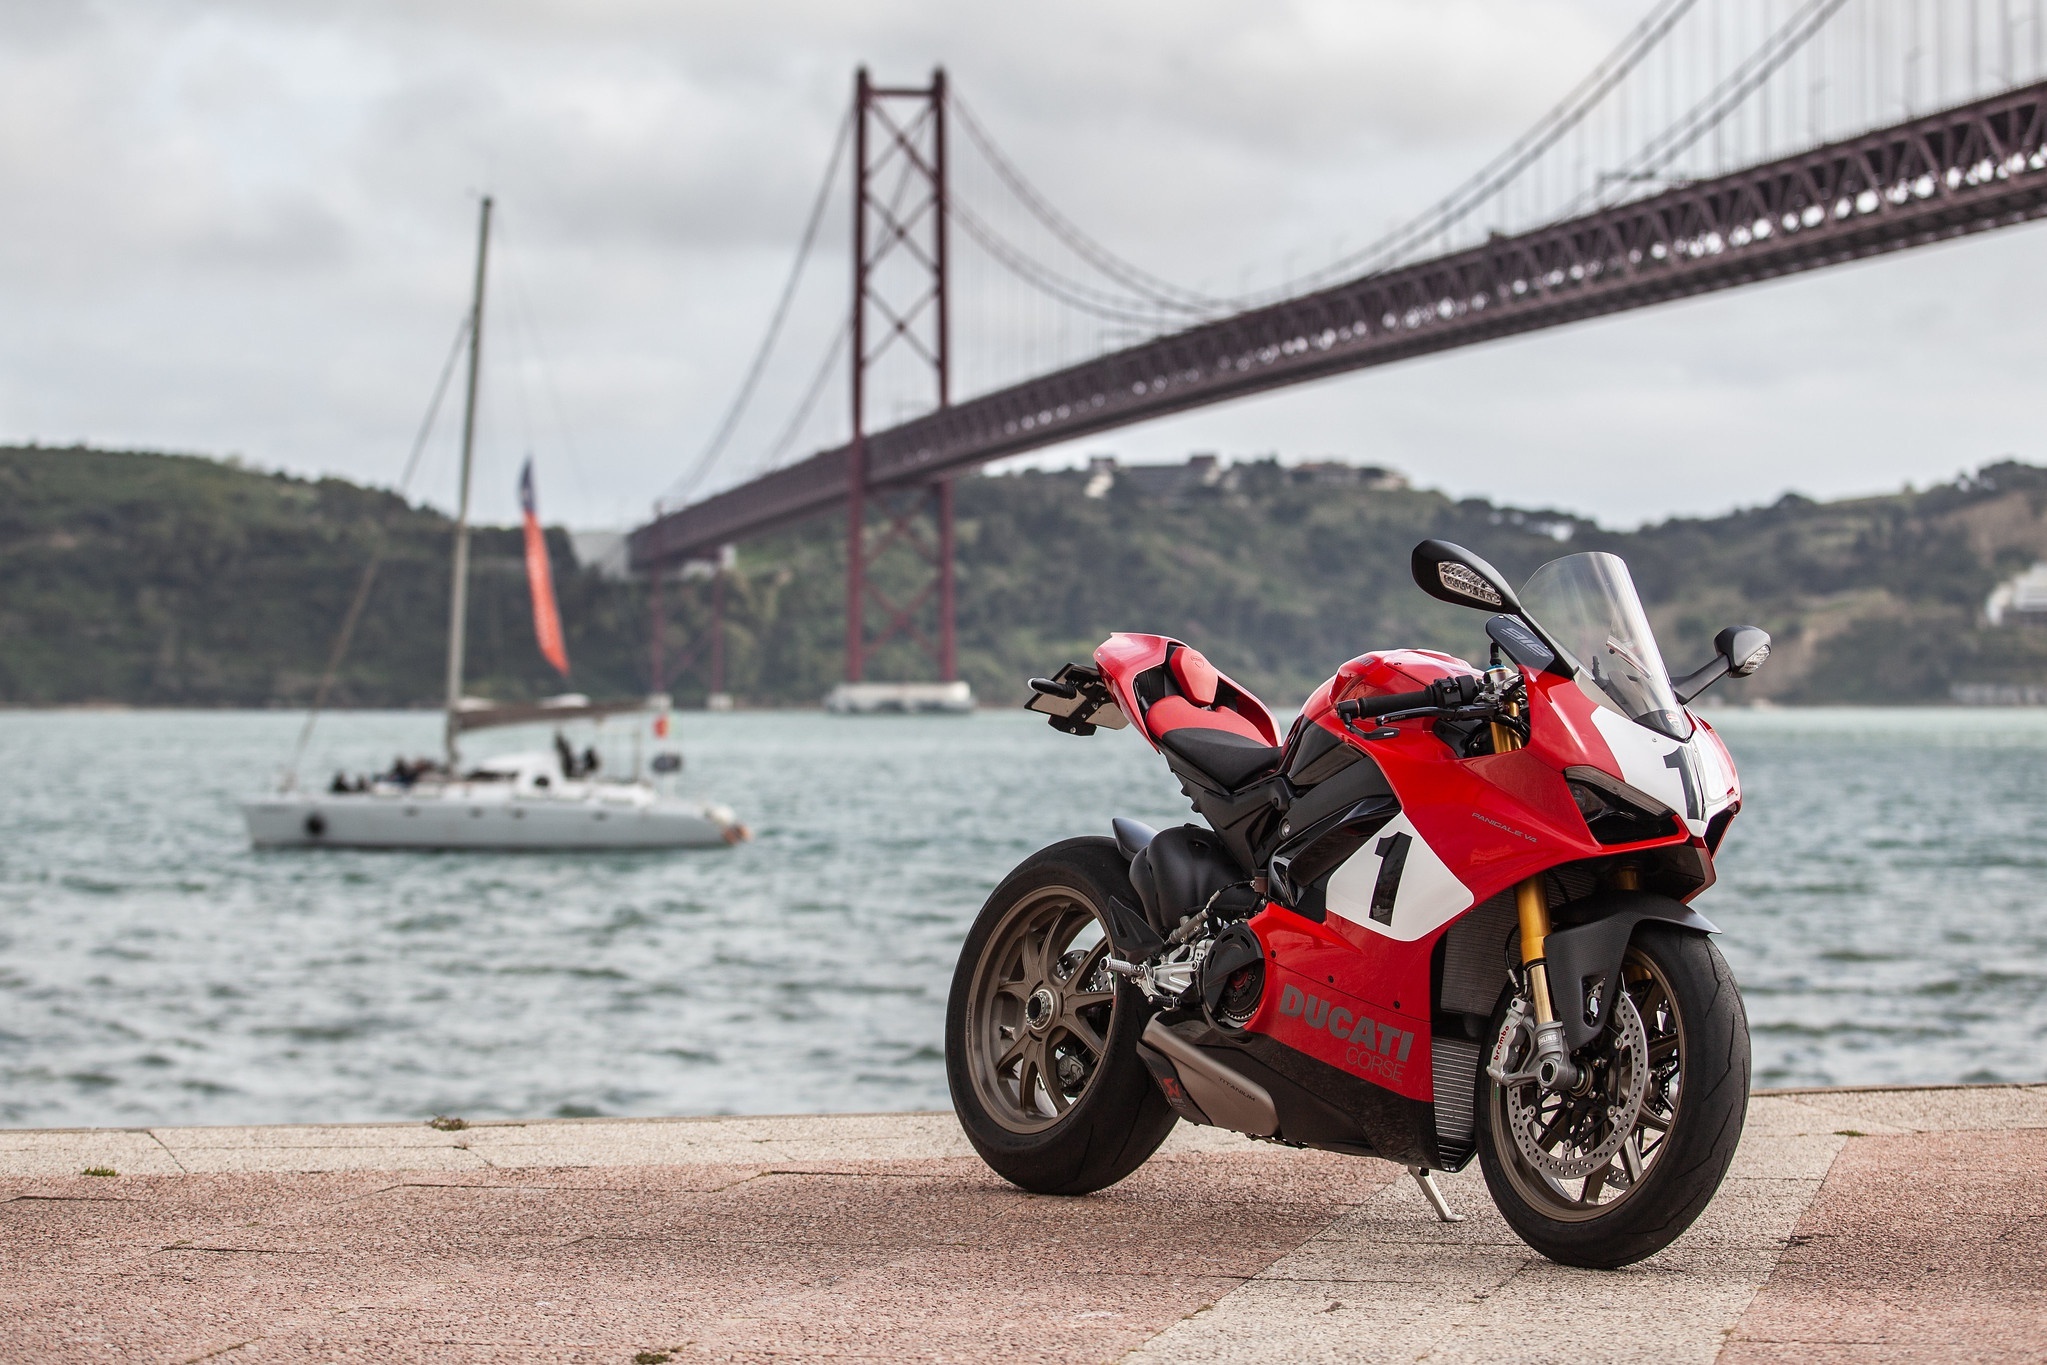 Ducati Panigale V4, HD wallpapers and backgrounds, Ultimate motorcycling dream, Italian masterpiece, 2050x1370 HD Desktop